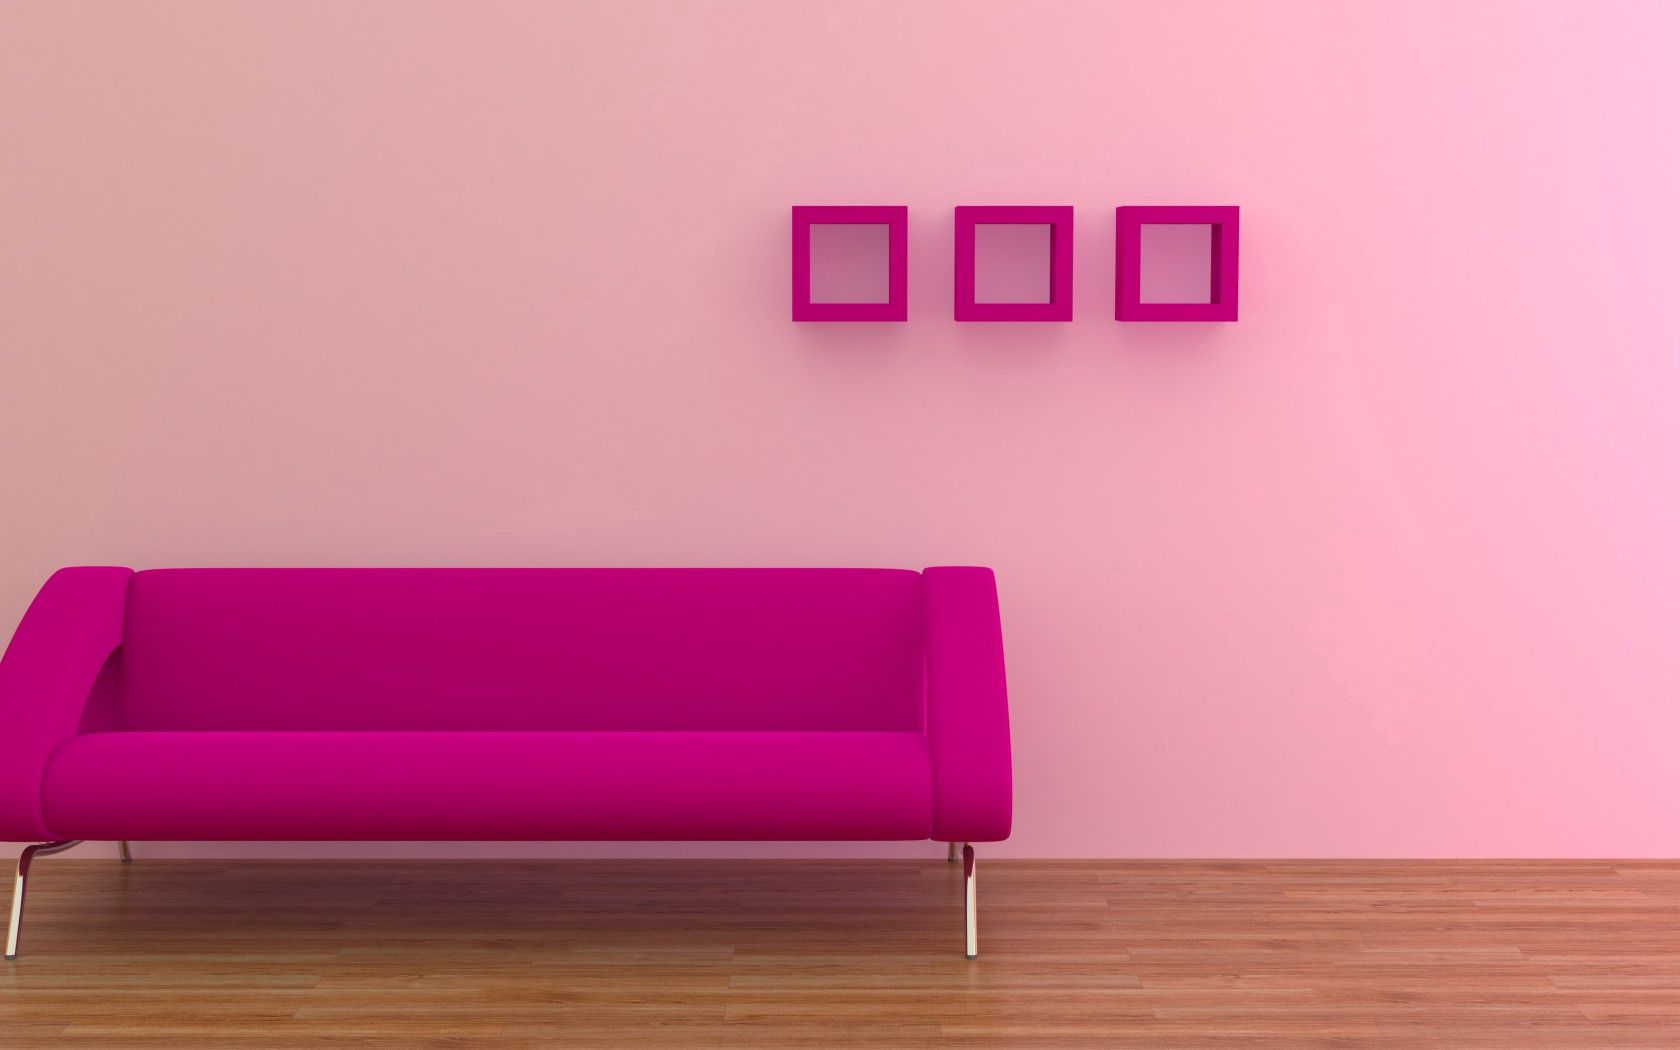  Sofa HQ Background Images